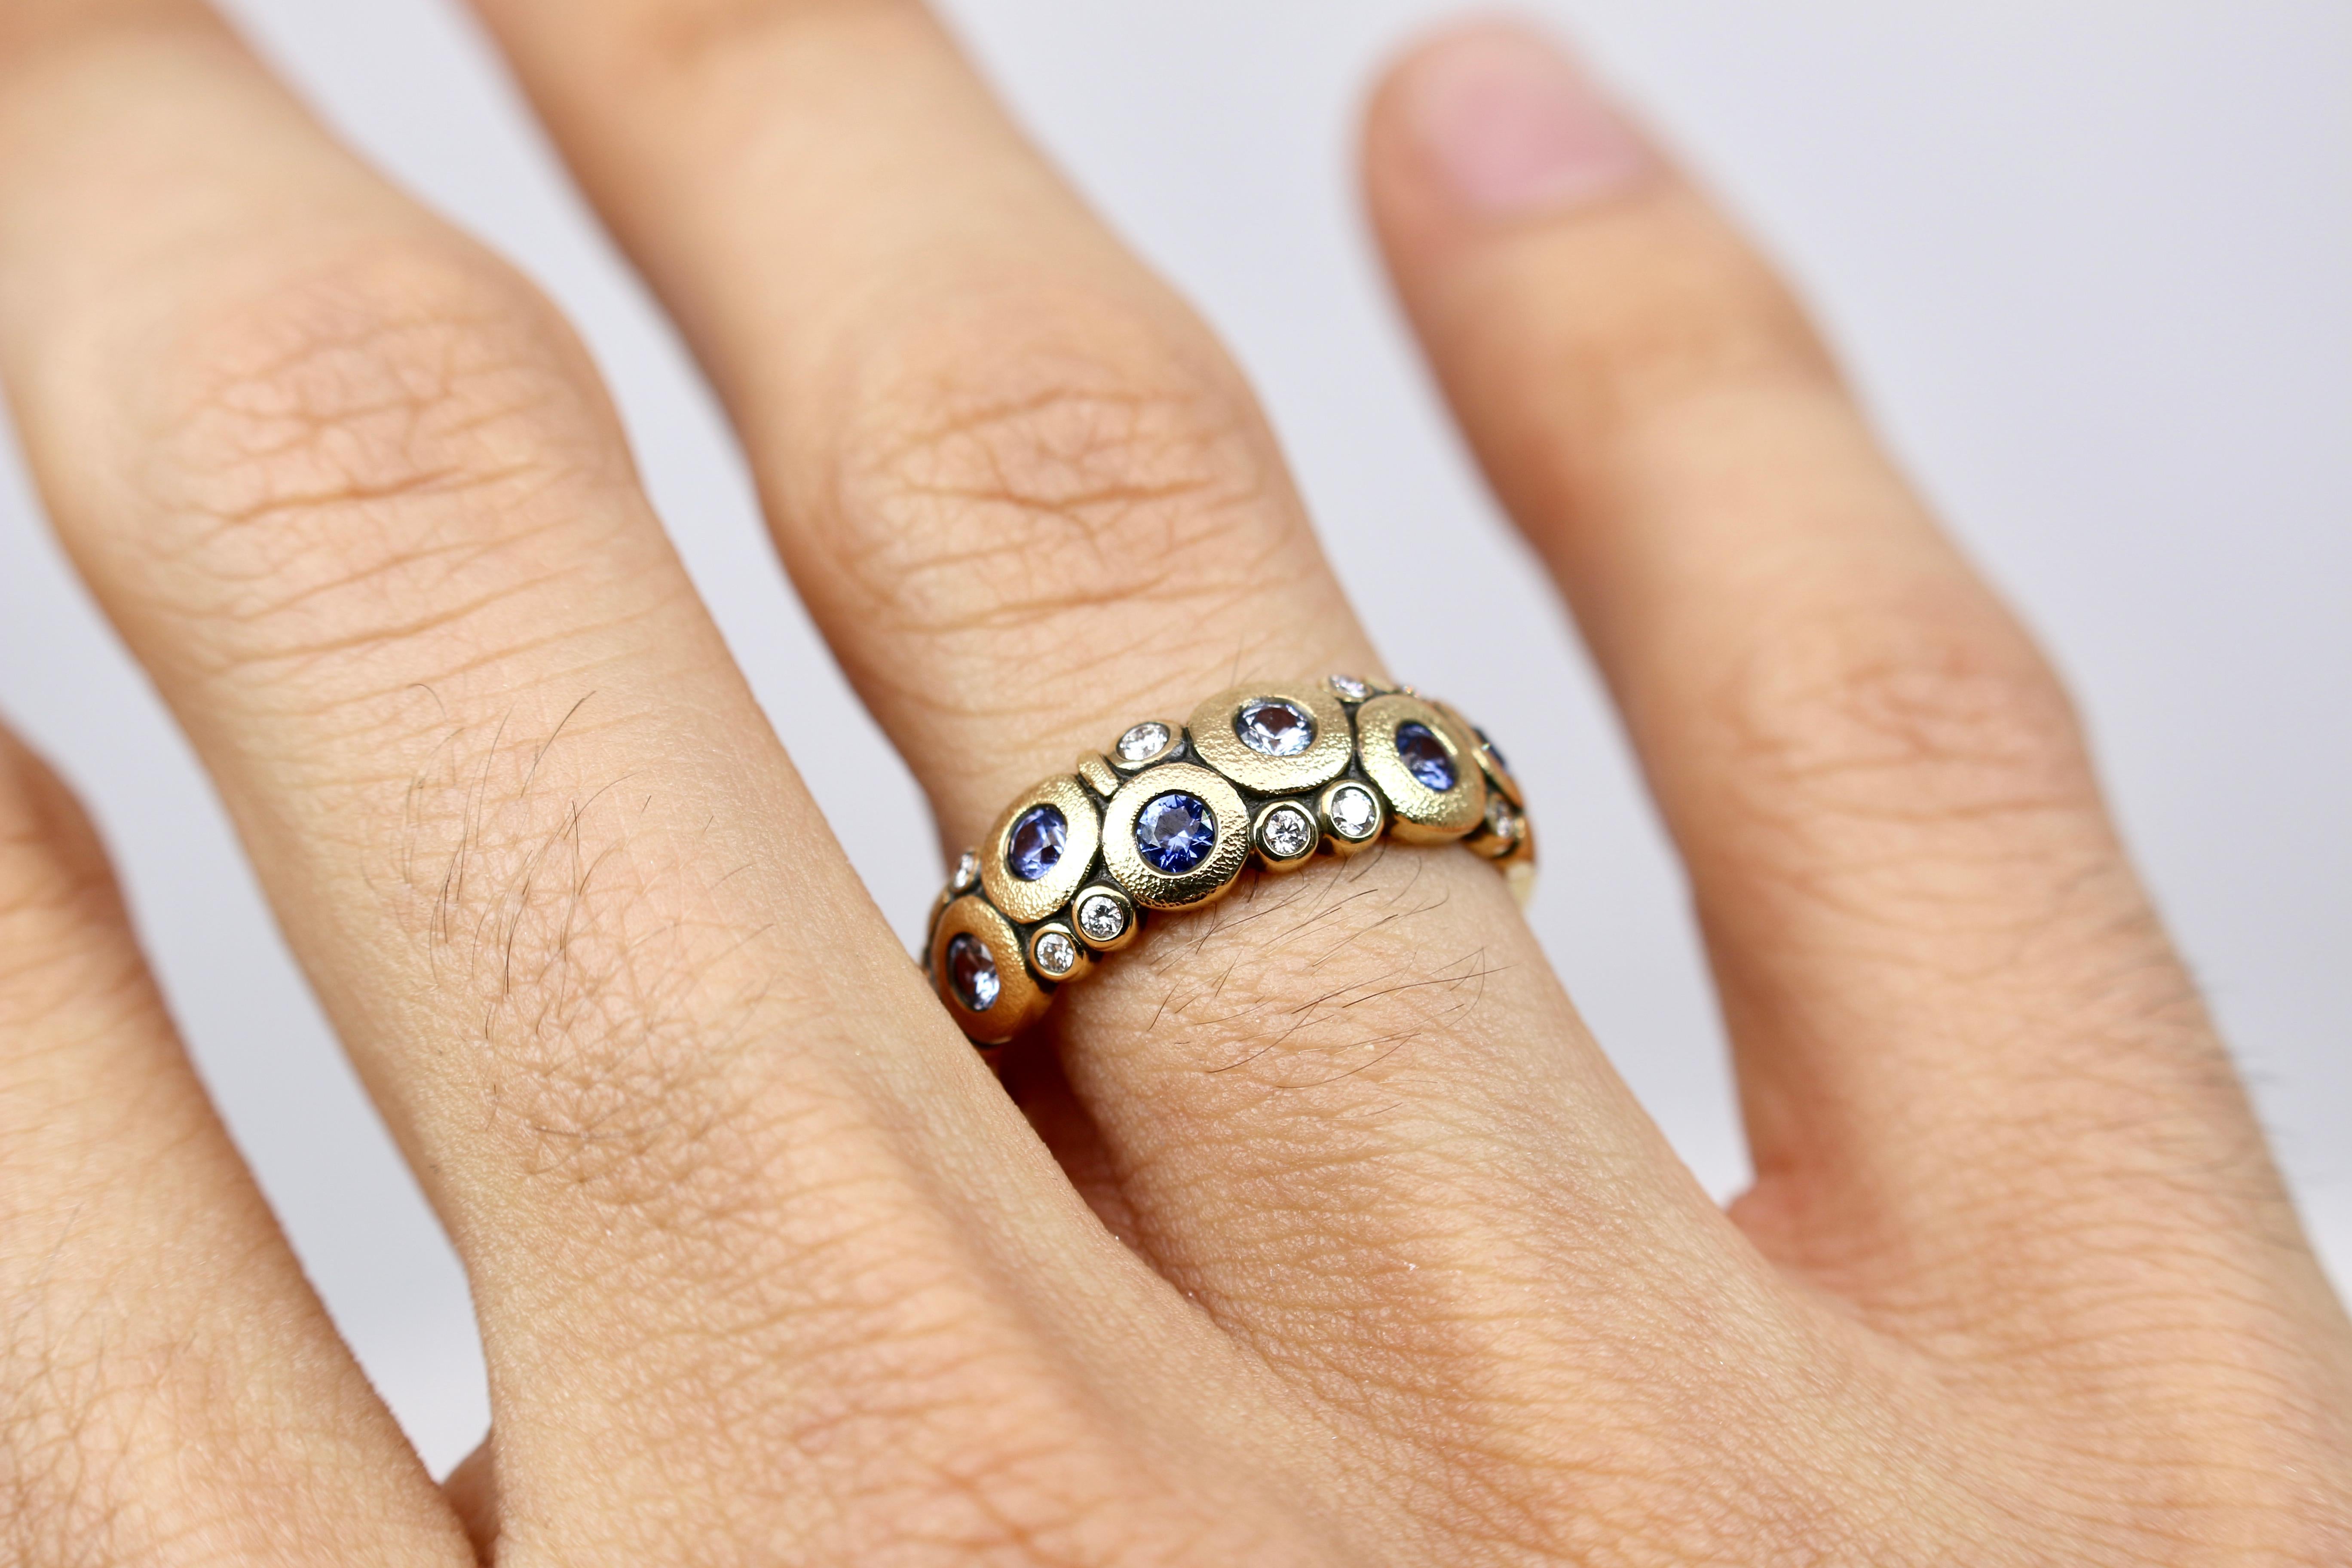 Sapphires and Diamonds have never looked better than In Sepkus’ “Candy” Dome ring. The Ring displays 9 White Diamonds at (0.12ct) each and 6 Sapphires at approximately (0.50 ct.) each. This ring is an excellent addition to any ring box that favors